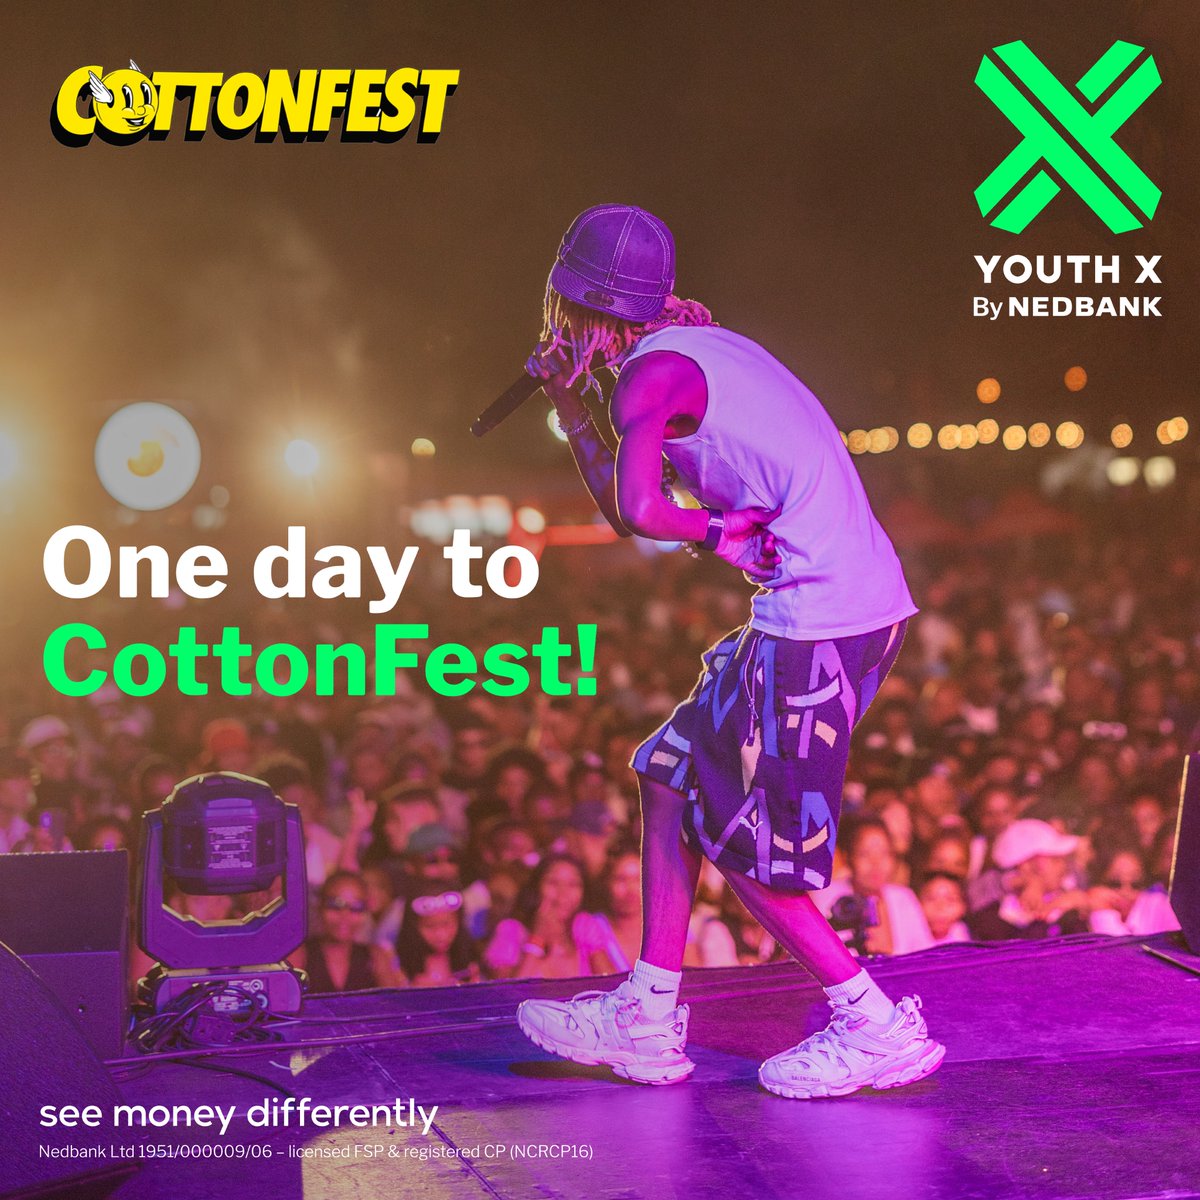 One day before sidlukotini! 🤩 We can’t wait to see all you cotton eaters at @CottonFestJHB. #UnlockYourX